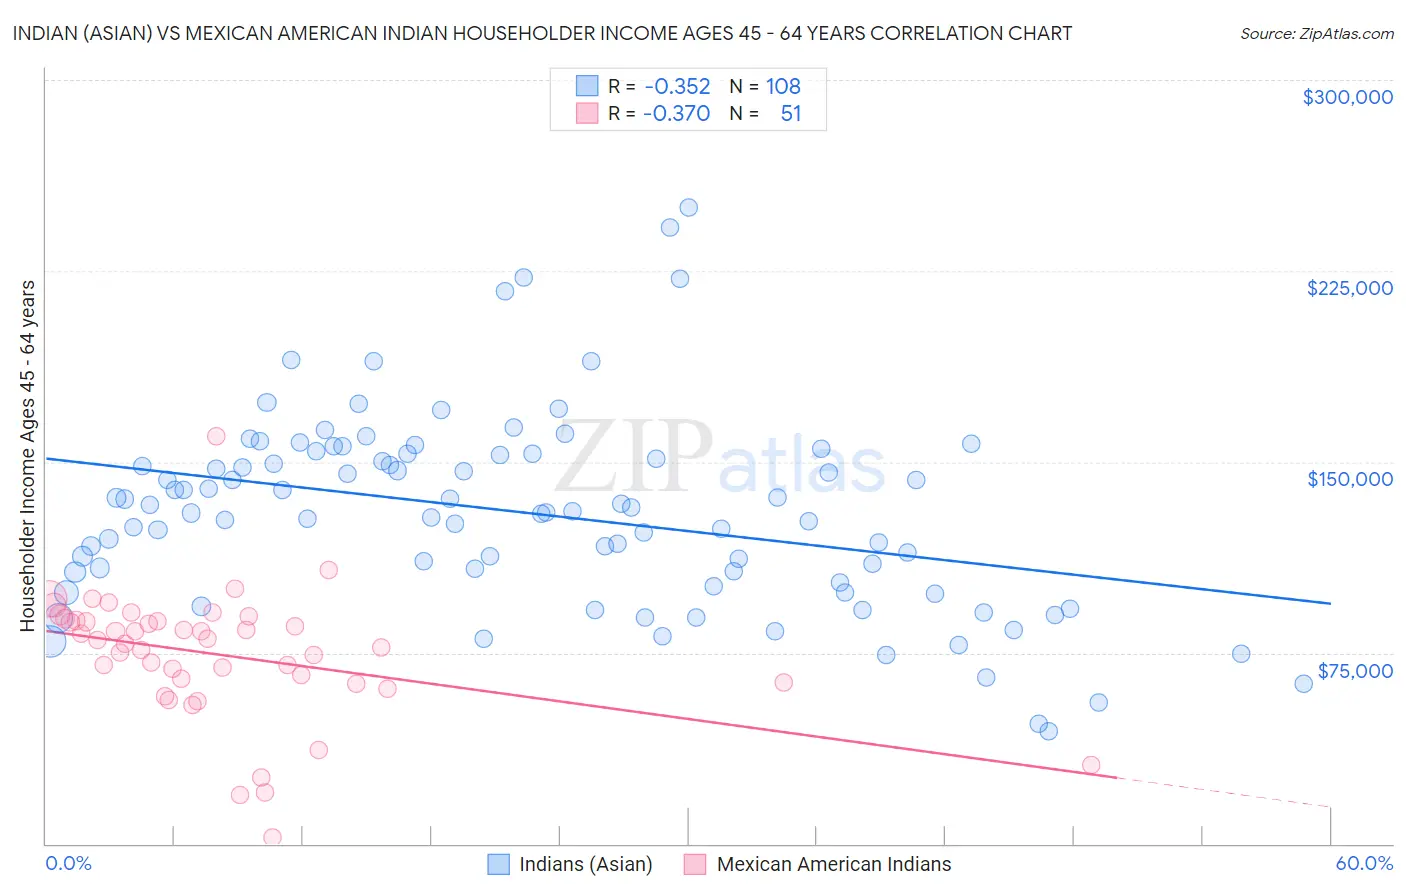 Indian (Asian) vs Mexican American Indian Householder Income Ages 45 - 64 years